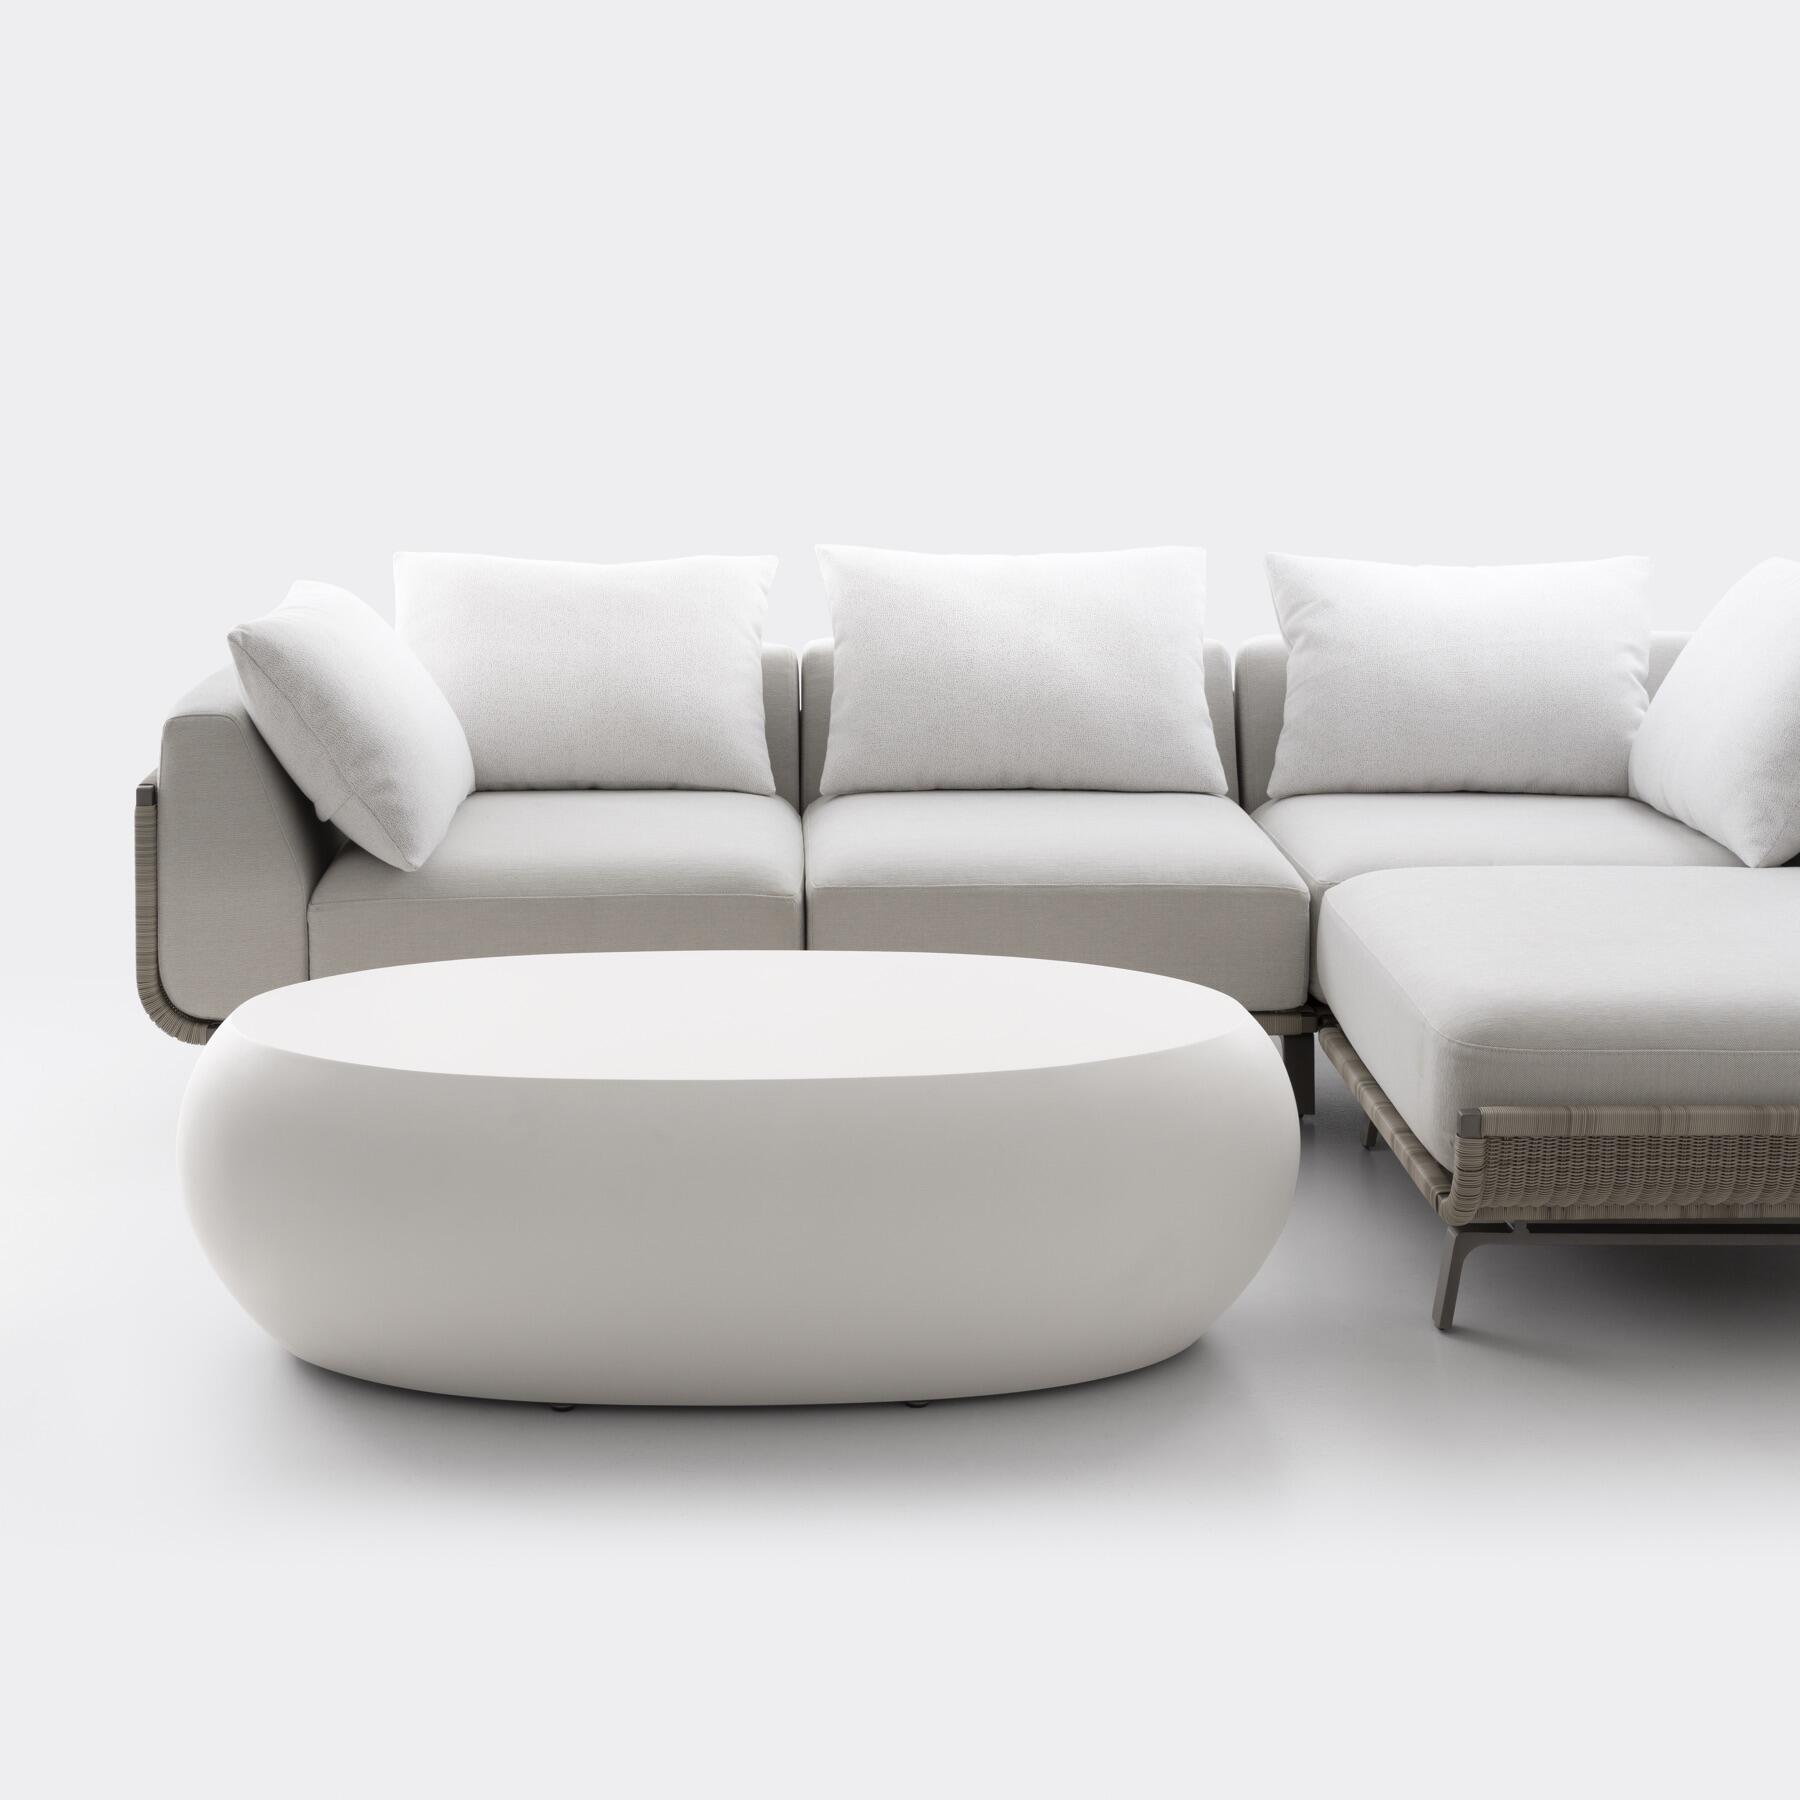 Plateau Cocktail Table, Polar White, Shown with Tortuga Sectional